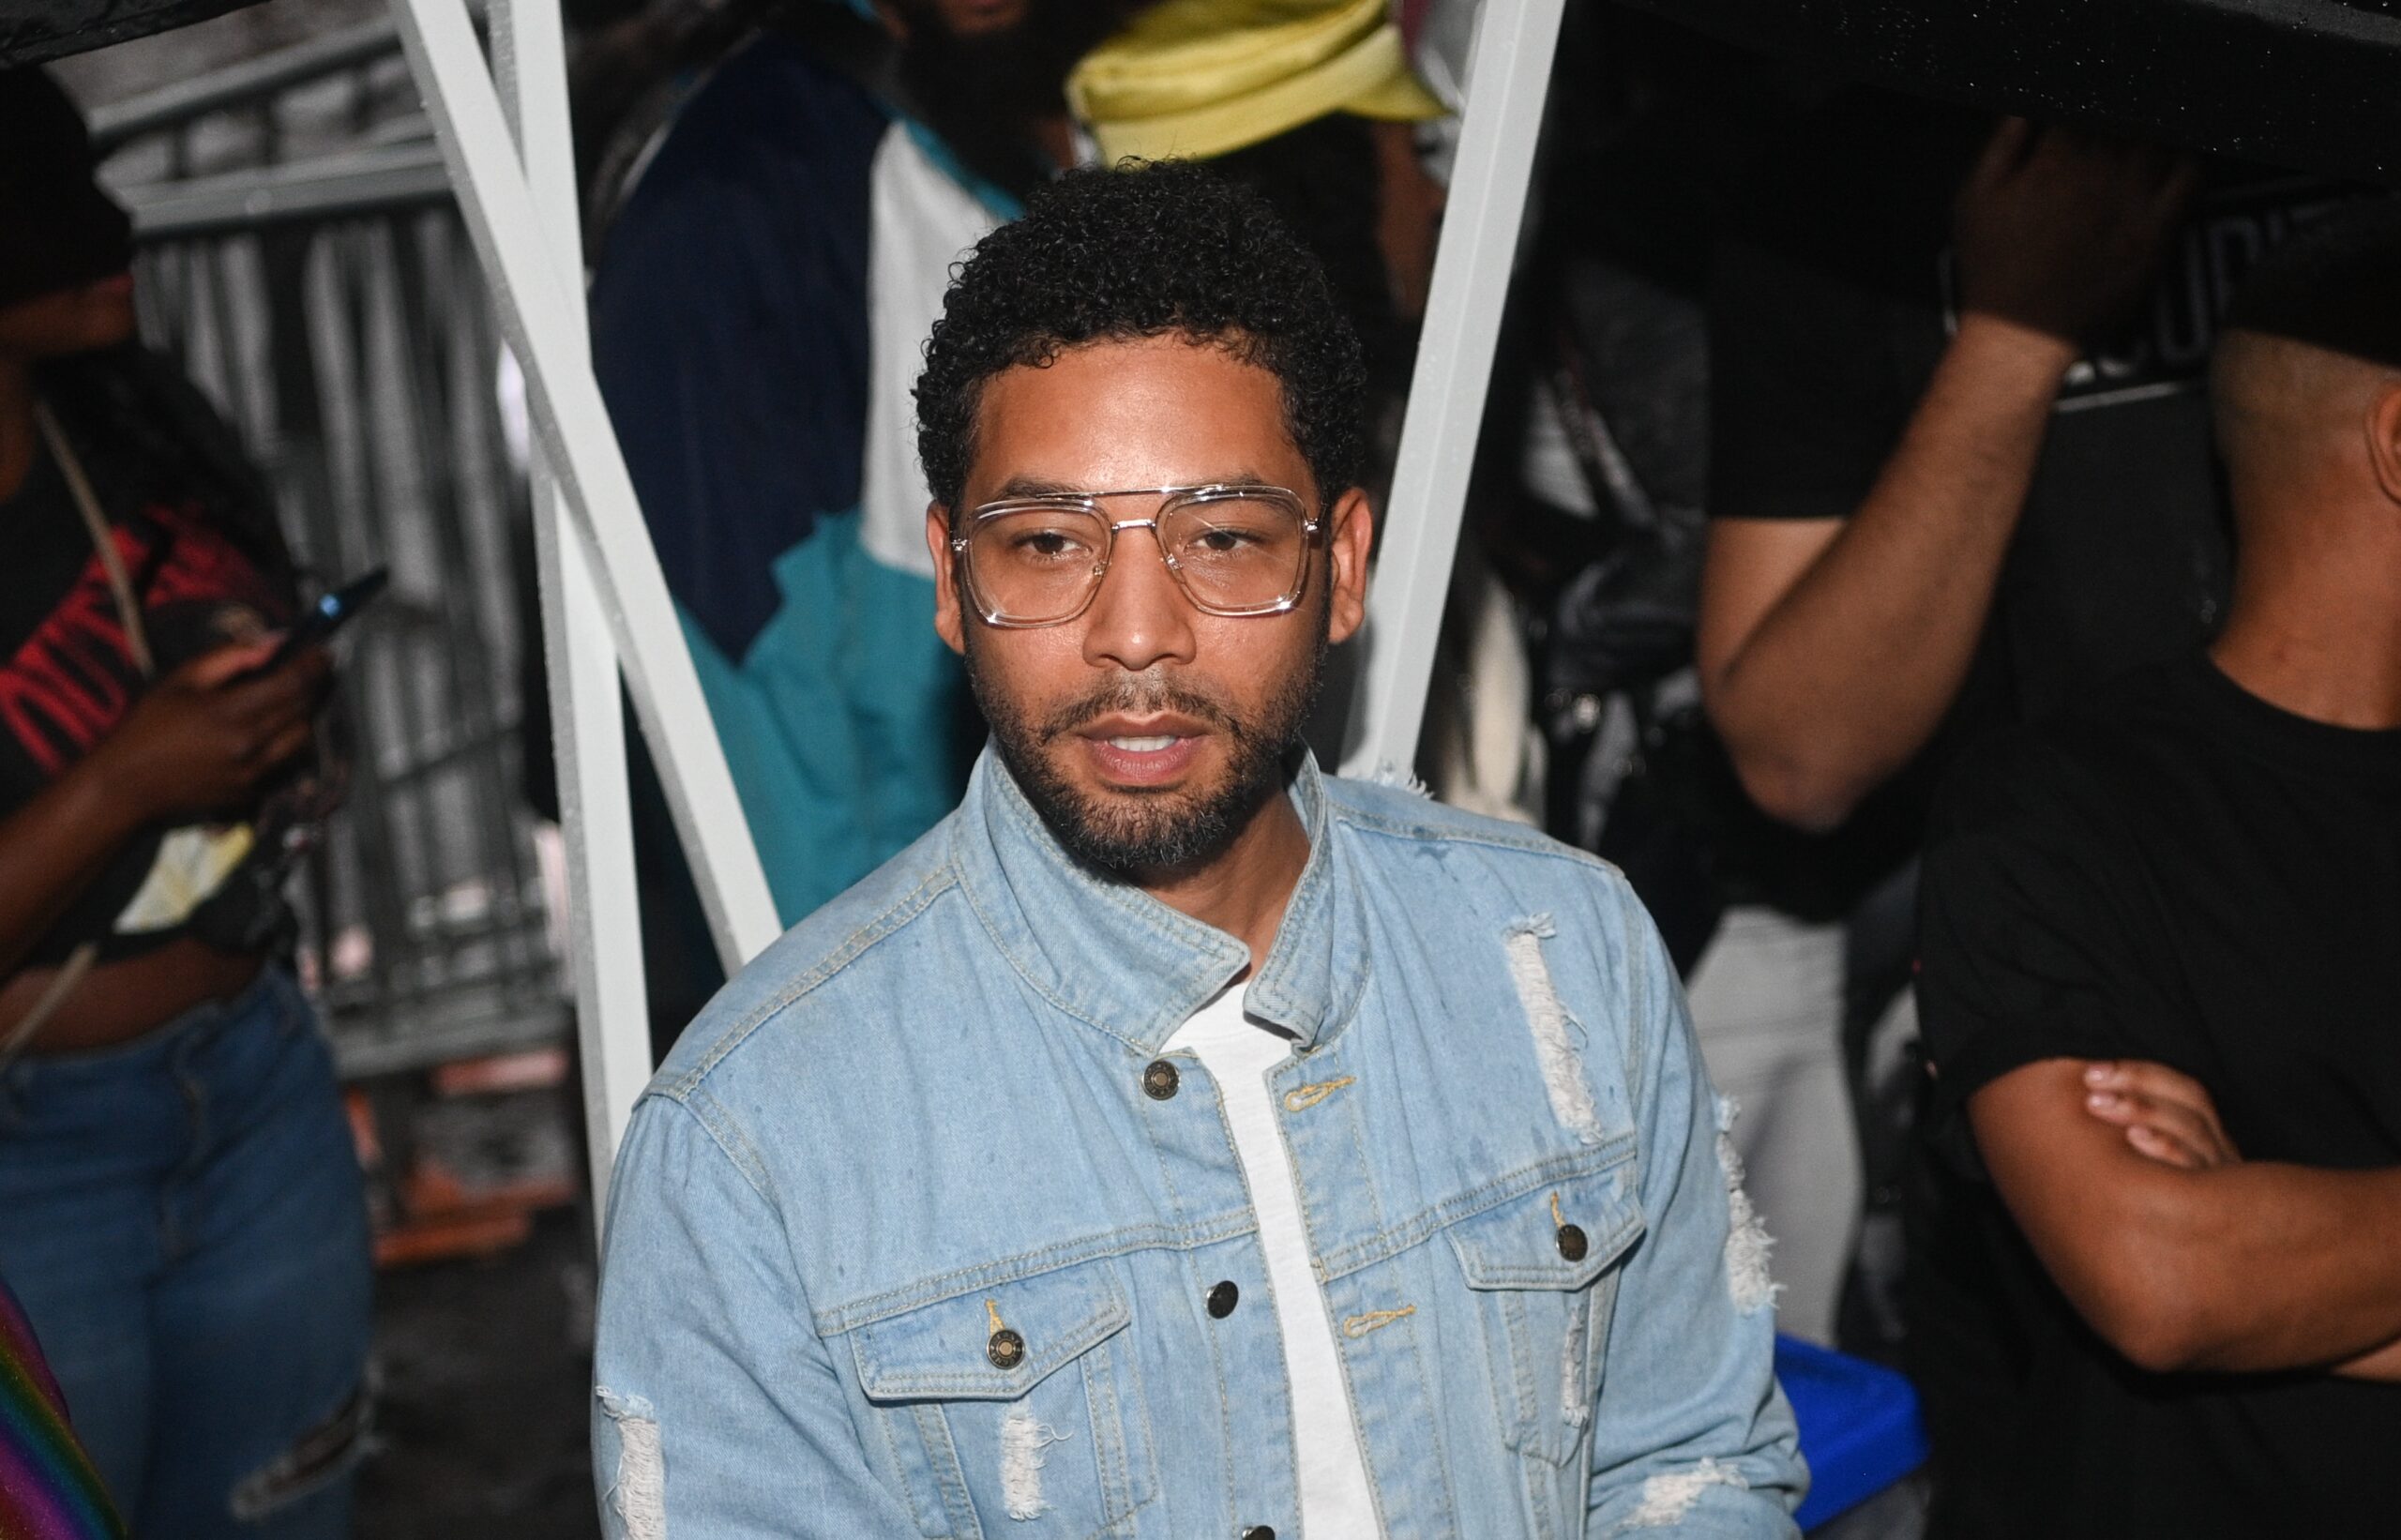 Jussie Smollett To Appeal Staged Hate Crime Conviction Before Illinois Supreme Court